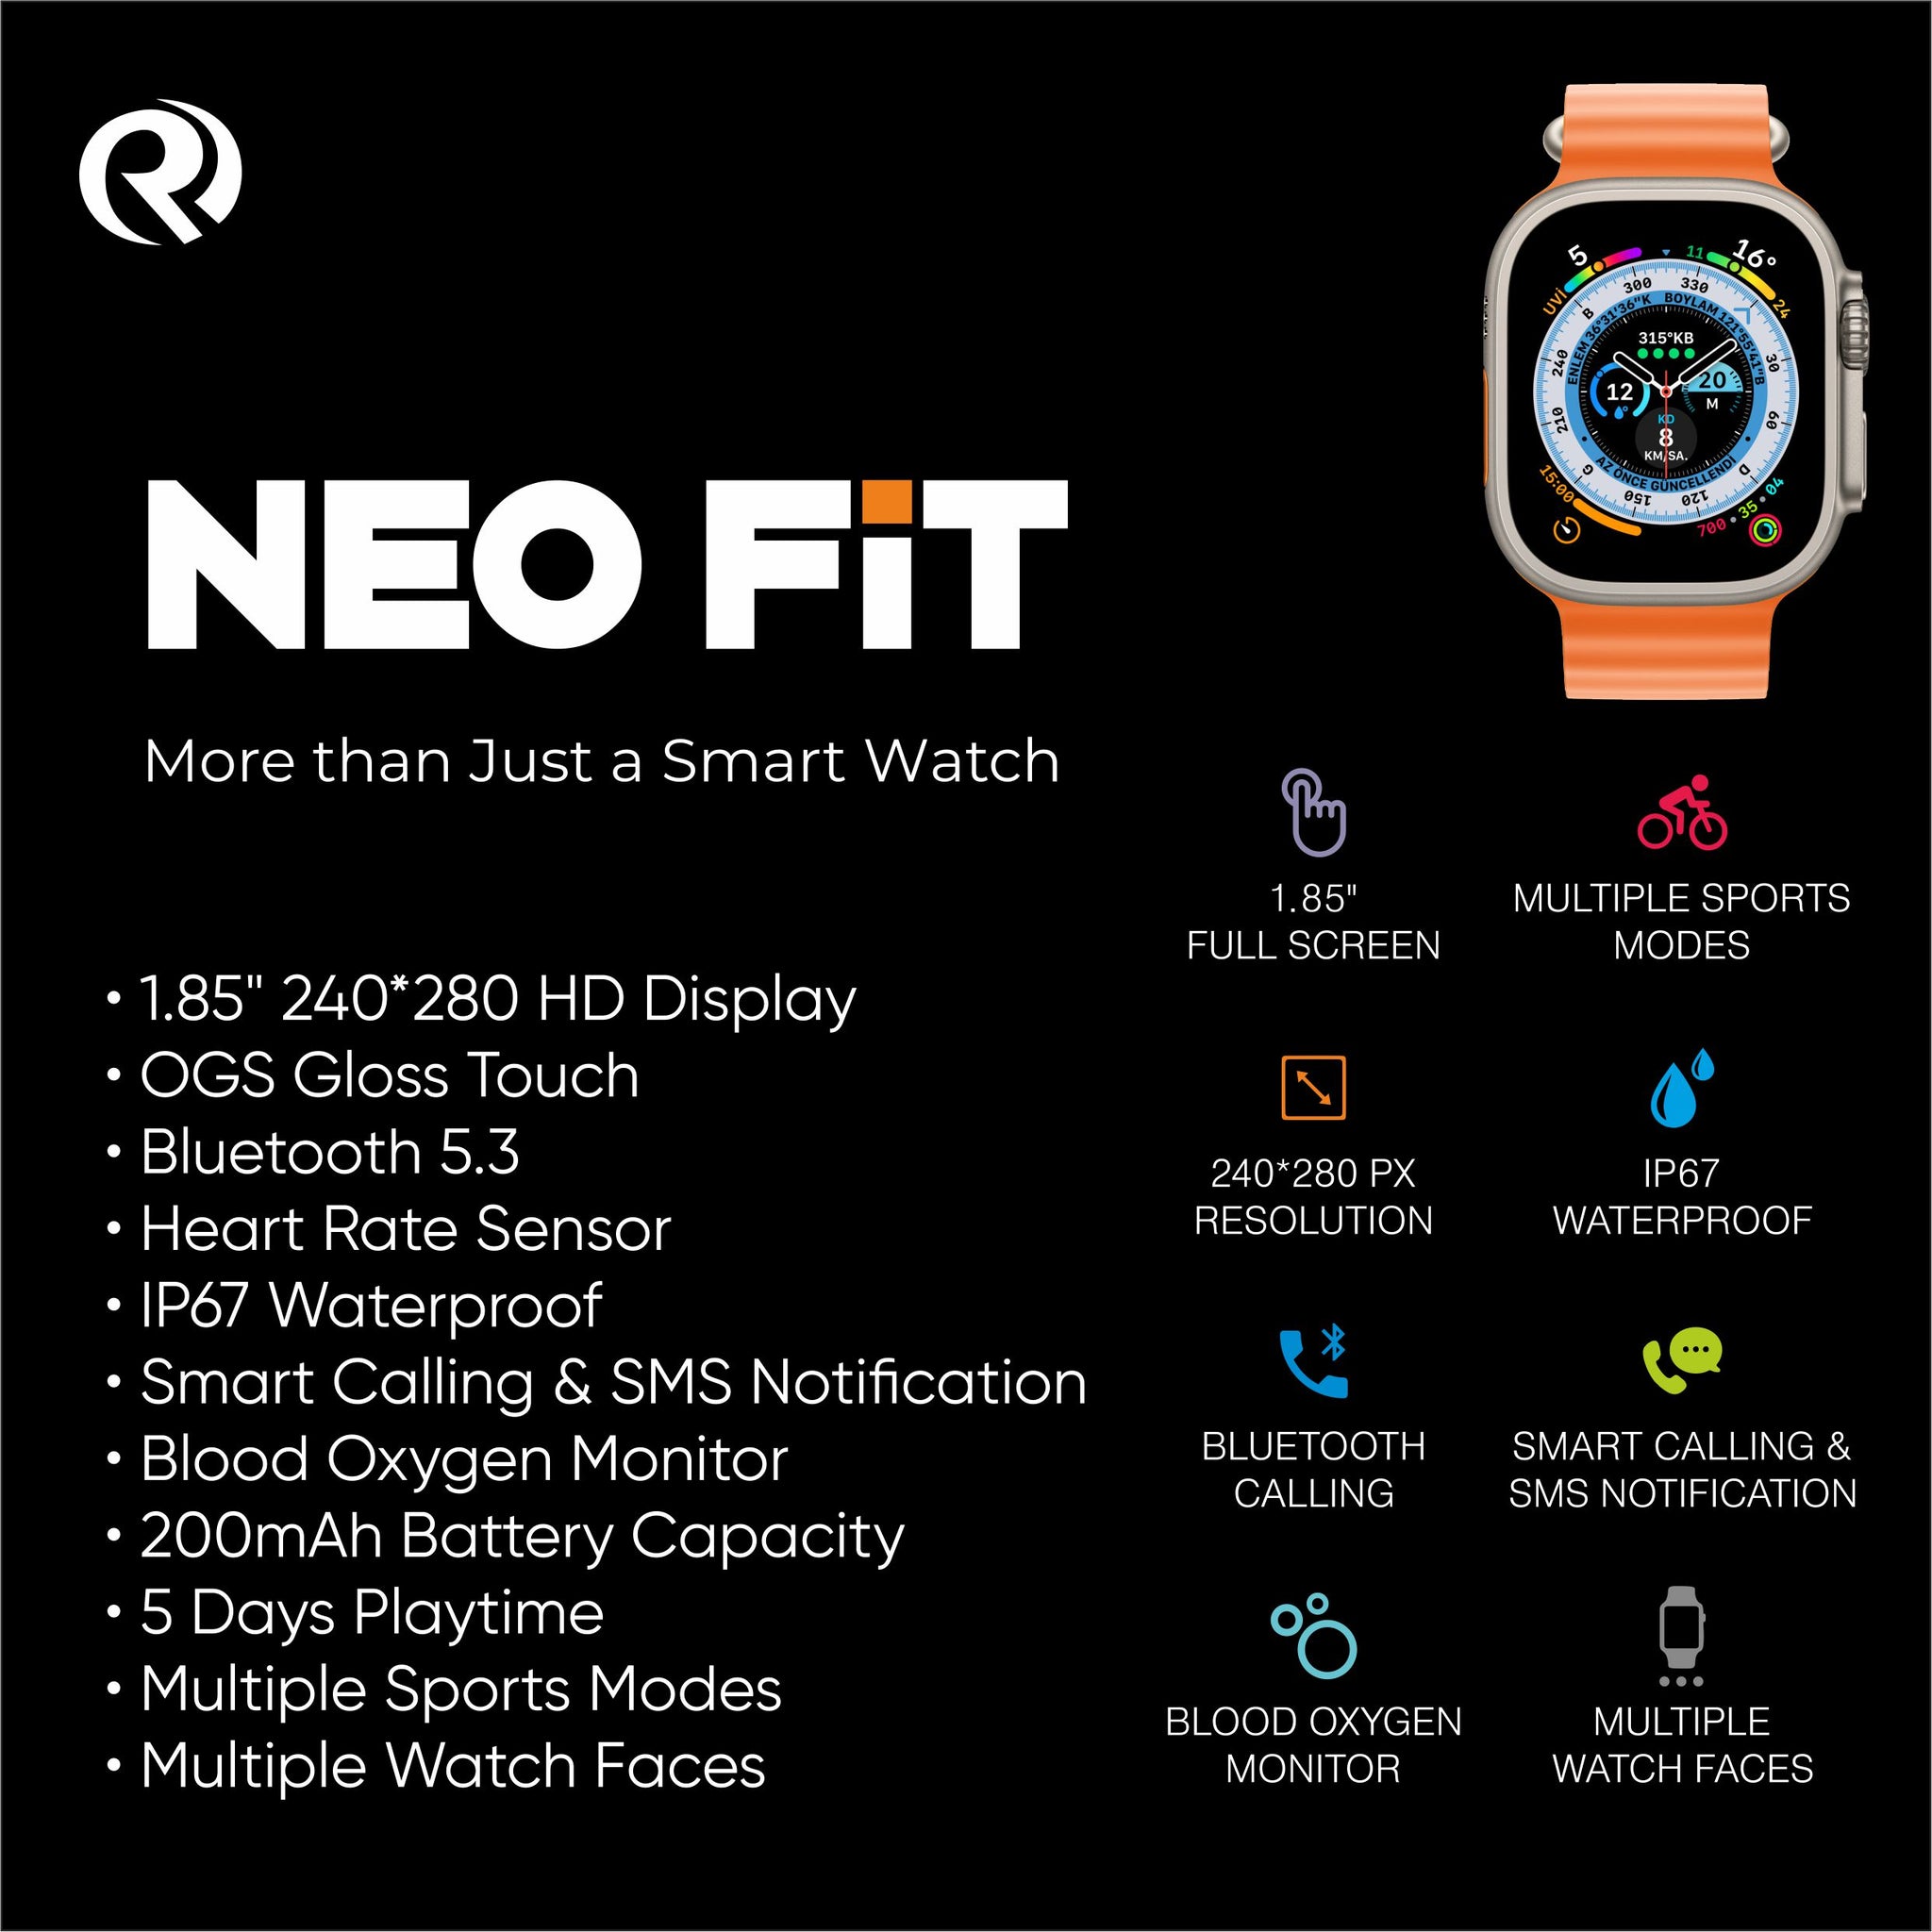 Neo Fit Smart watch with 1.85" OGS Gloss Touch Display, Bluetooth 5.3, Smart Calling, IP67 Splashproof, Heart & SpO2 Monitoring, Multi Sports Modes, Smartwatch for Men and Women